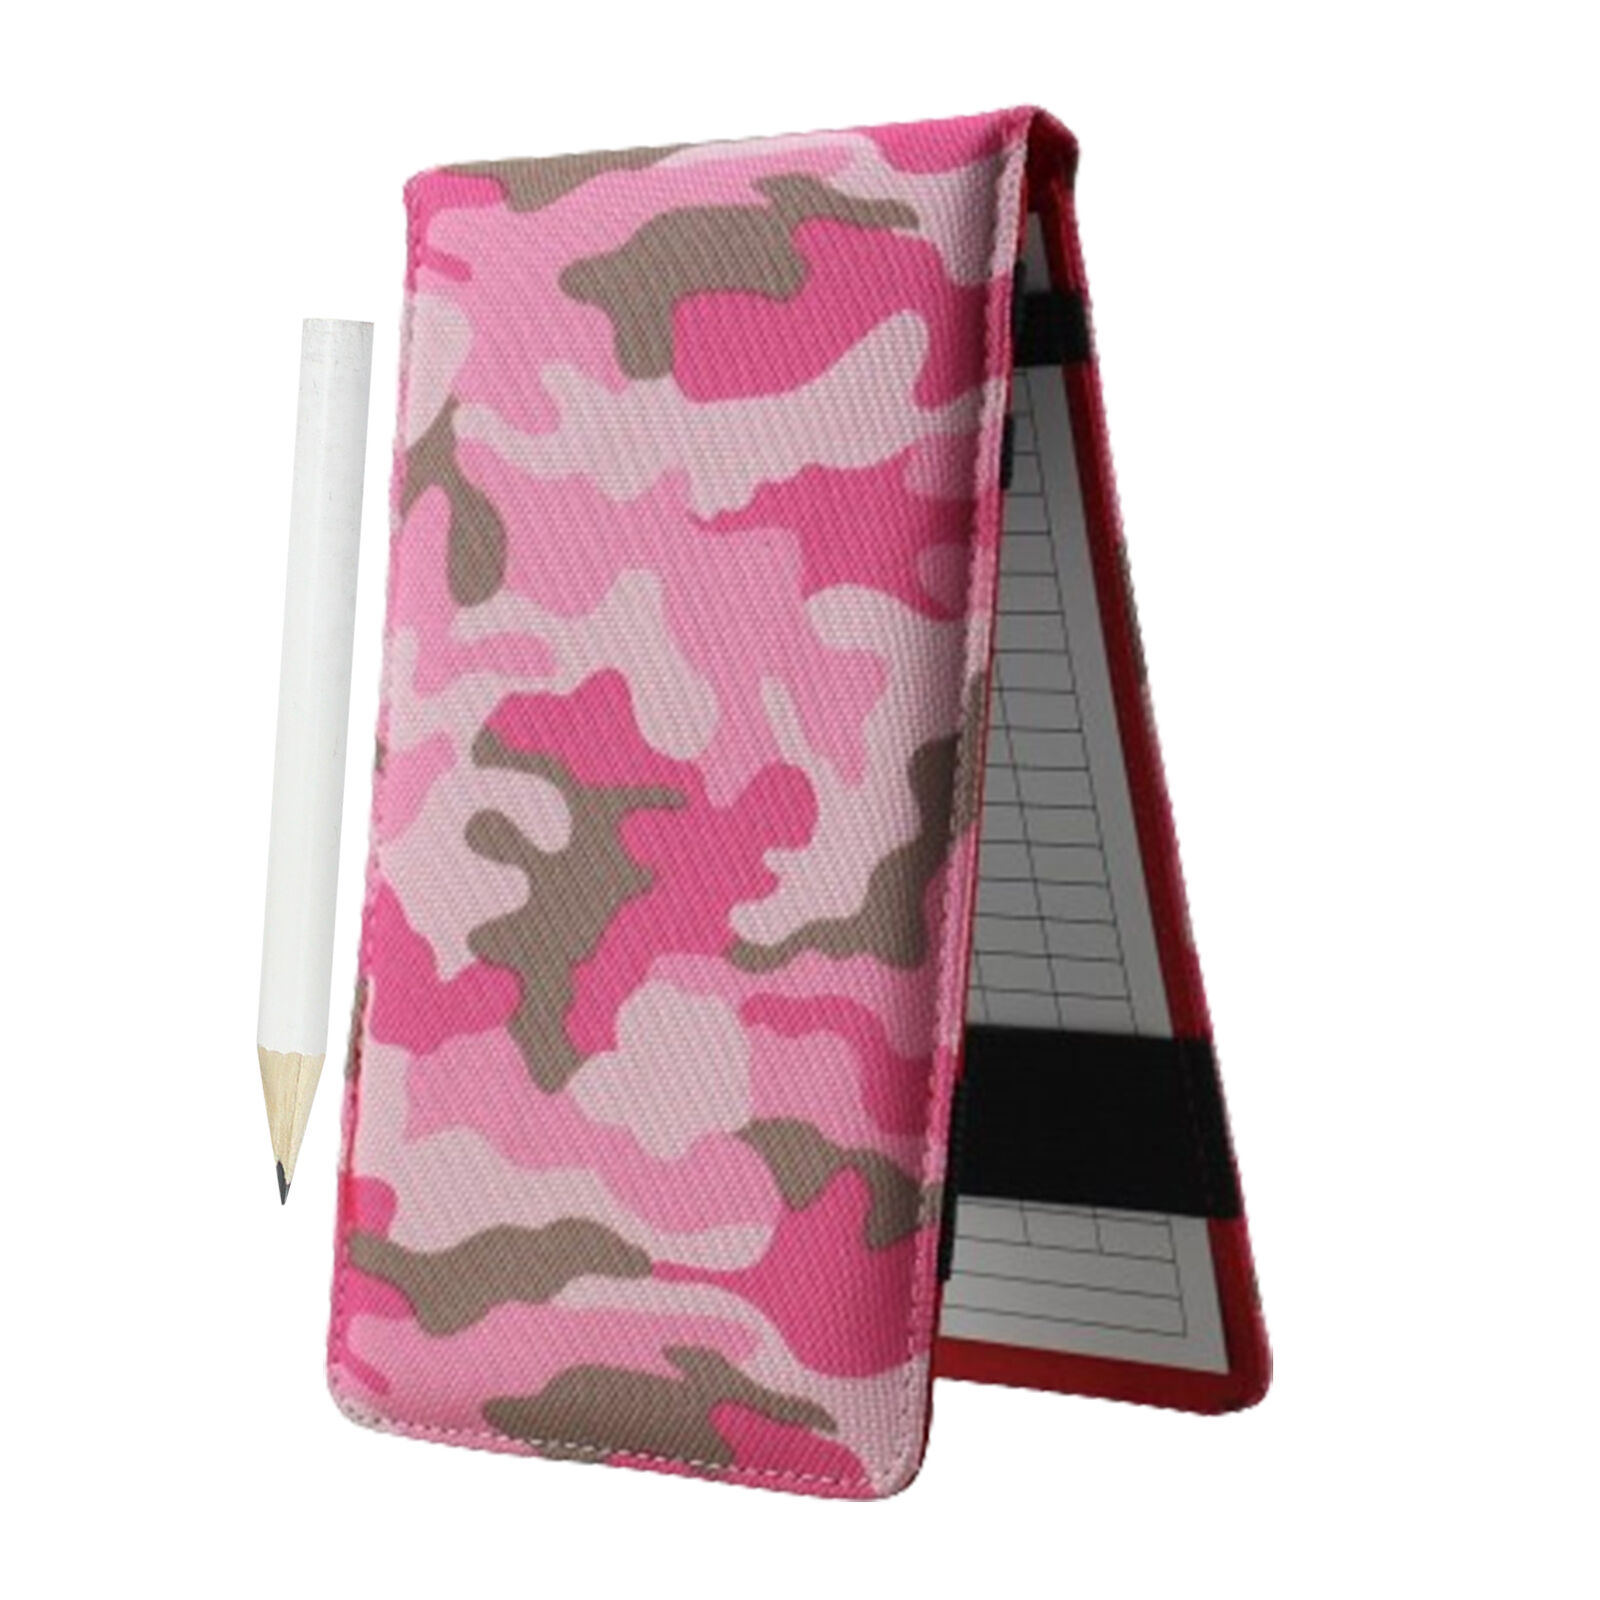 Golf Score Book Golf Journal Notebook with Pencil Oxford Cloth Club capable Unbranded does not apply - фотография #3